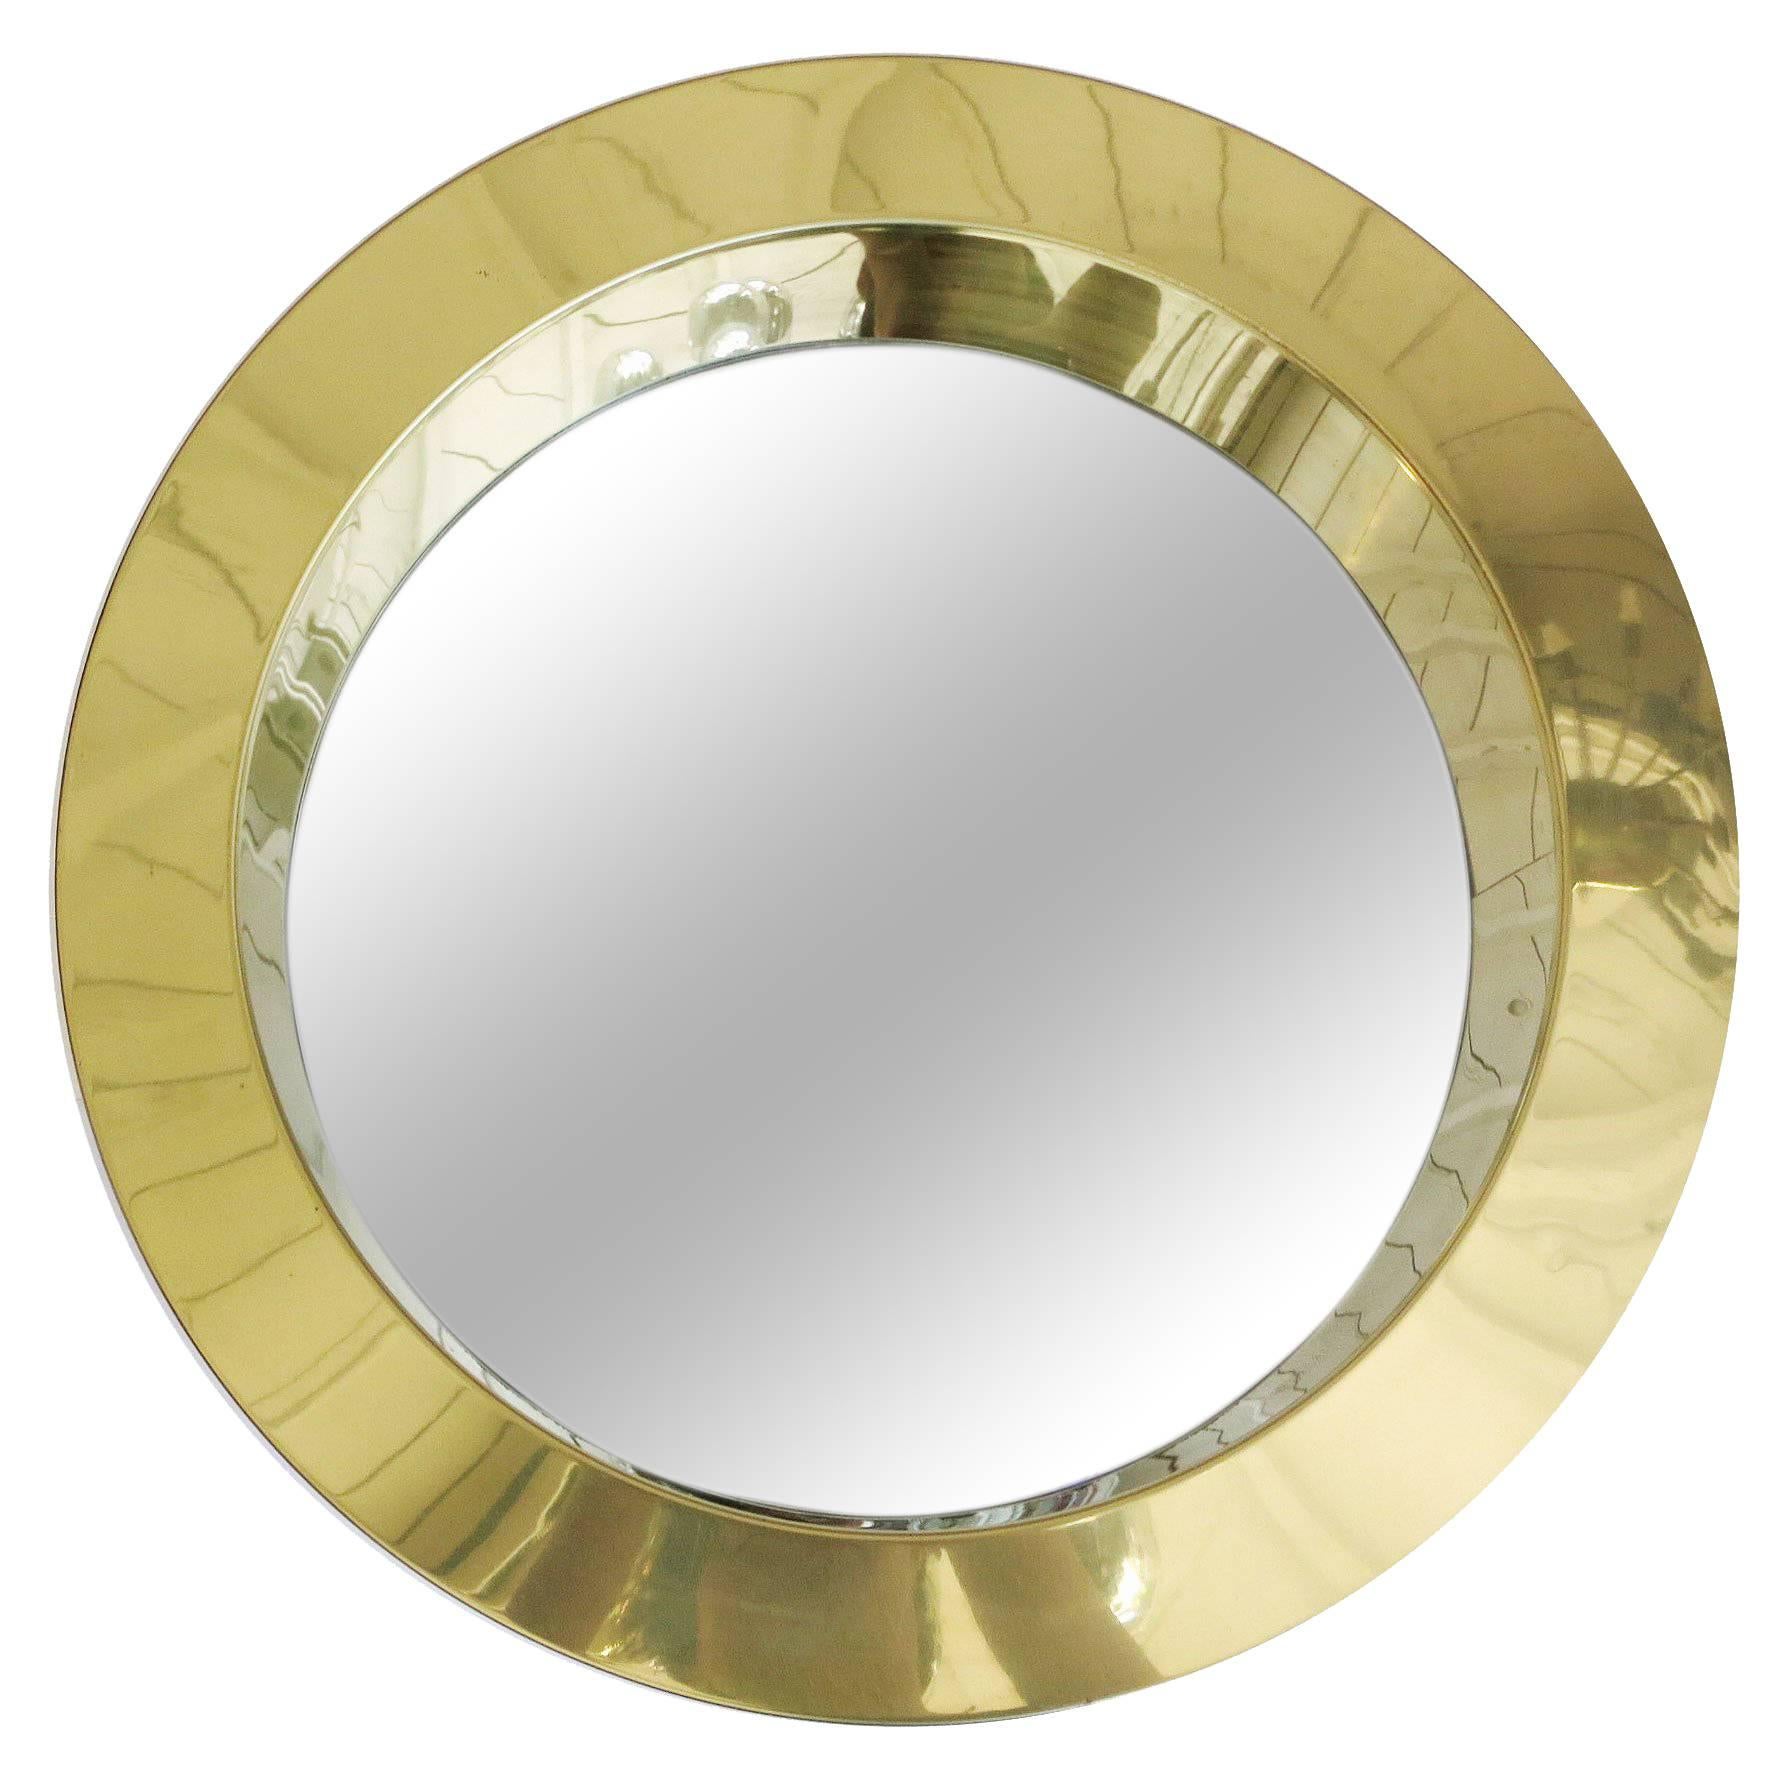 Large 24" Brass Disco Porthole Mirror by Curtis Jere, circa 1976